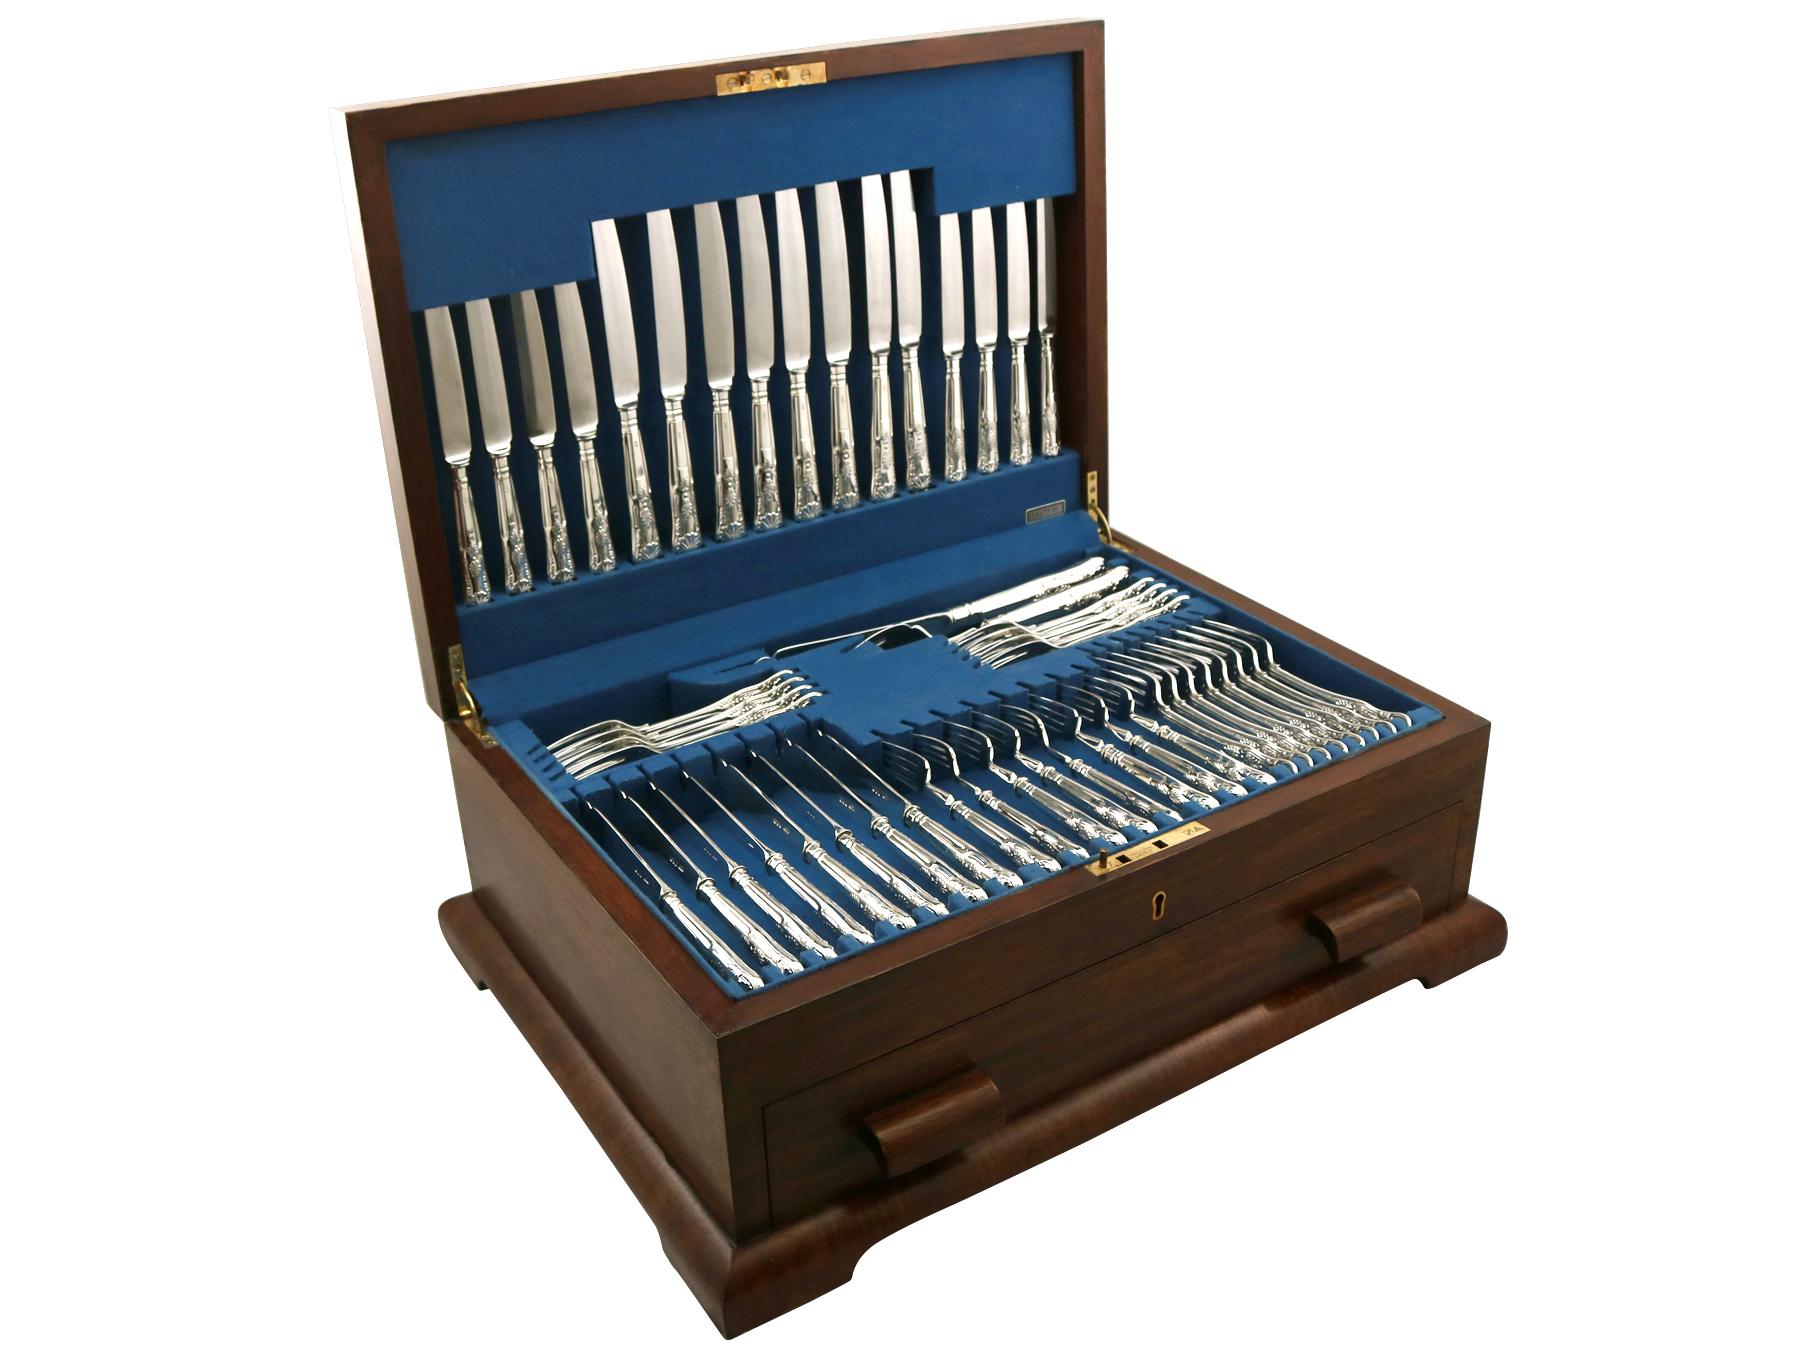 An exceptional, fine and impressive vintage Elizabeth II English sterling silver straight King's pattern flatware service for eight persons; an addition to our canteen of cutlery collection.

The pieces of this exceptional, vintage Elizabeth II